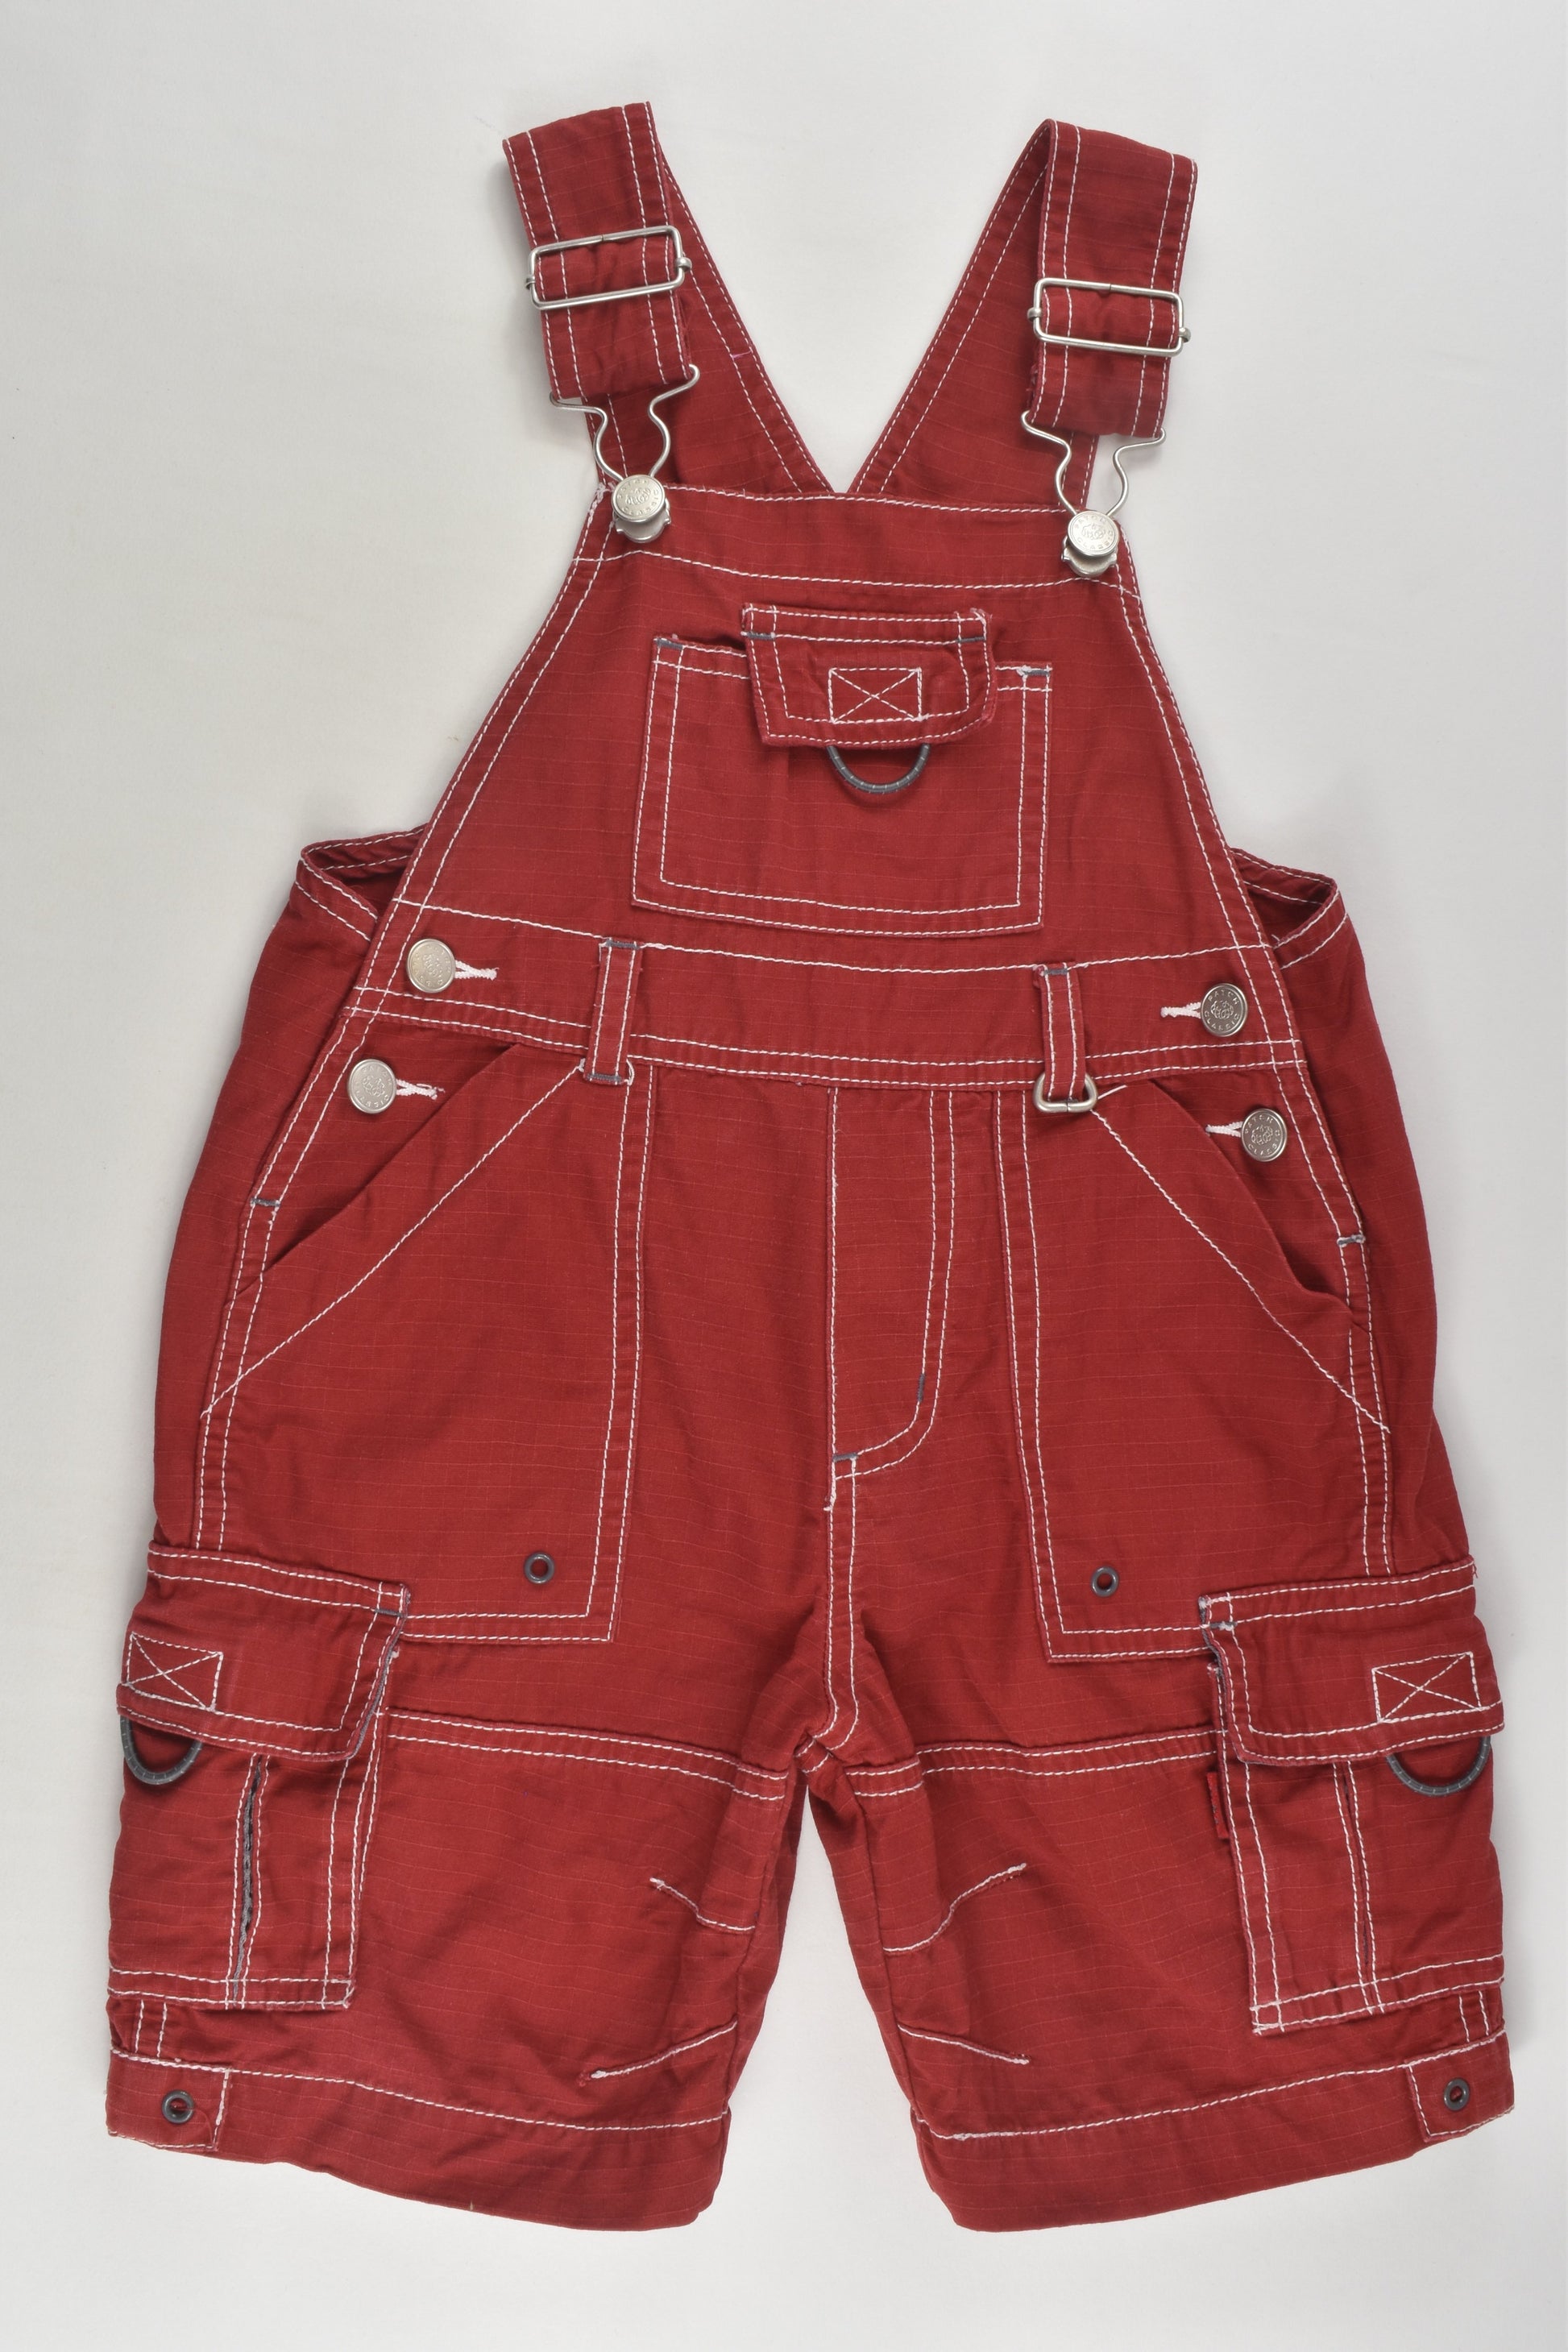 Pumpkin Patch Size 2 Older Style Short Overalls